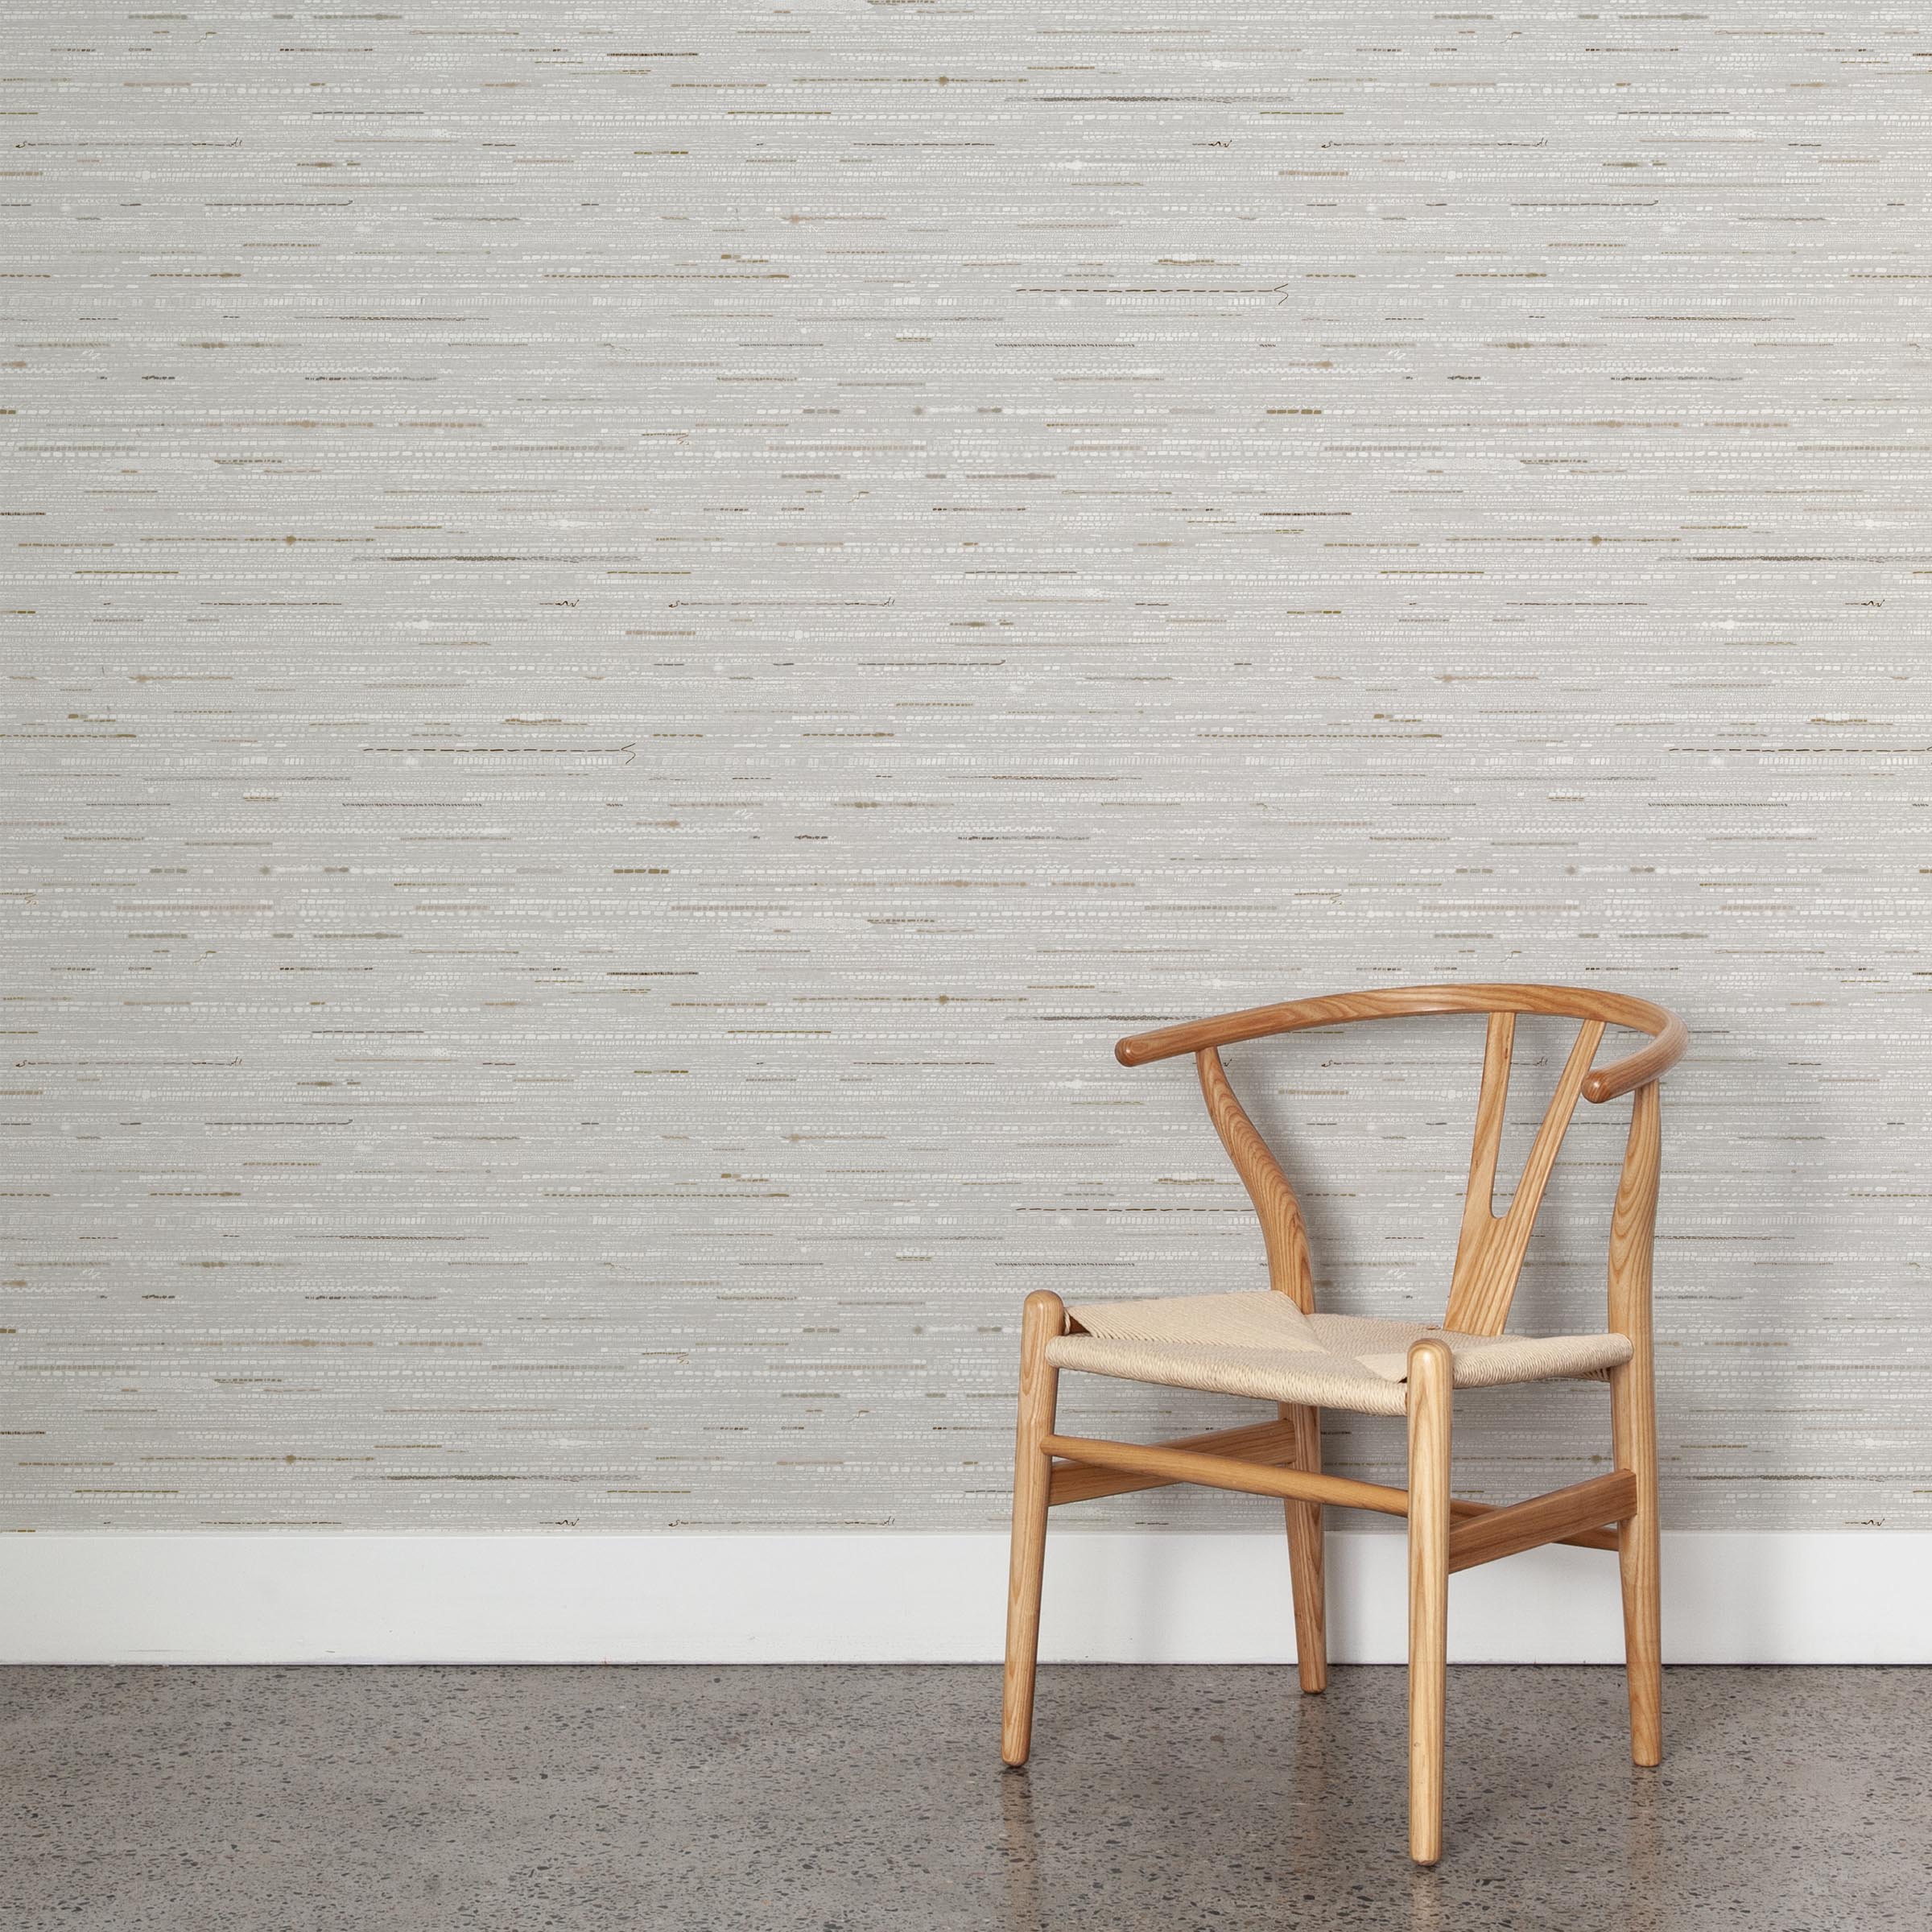 A wooden chair stands in front of a wall papered in a textural striped pattern in shades of gray, white and tan.